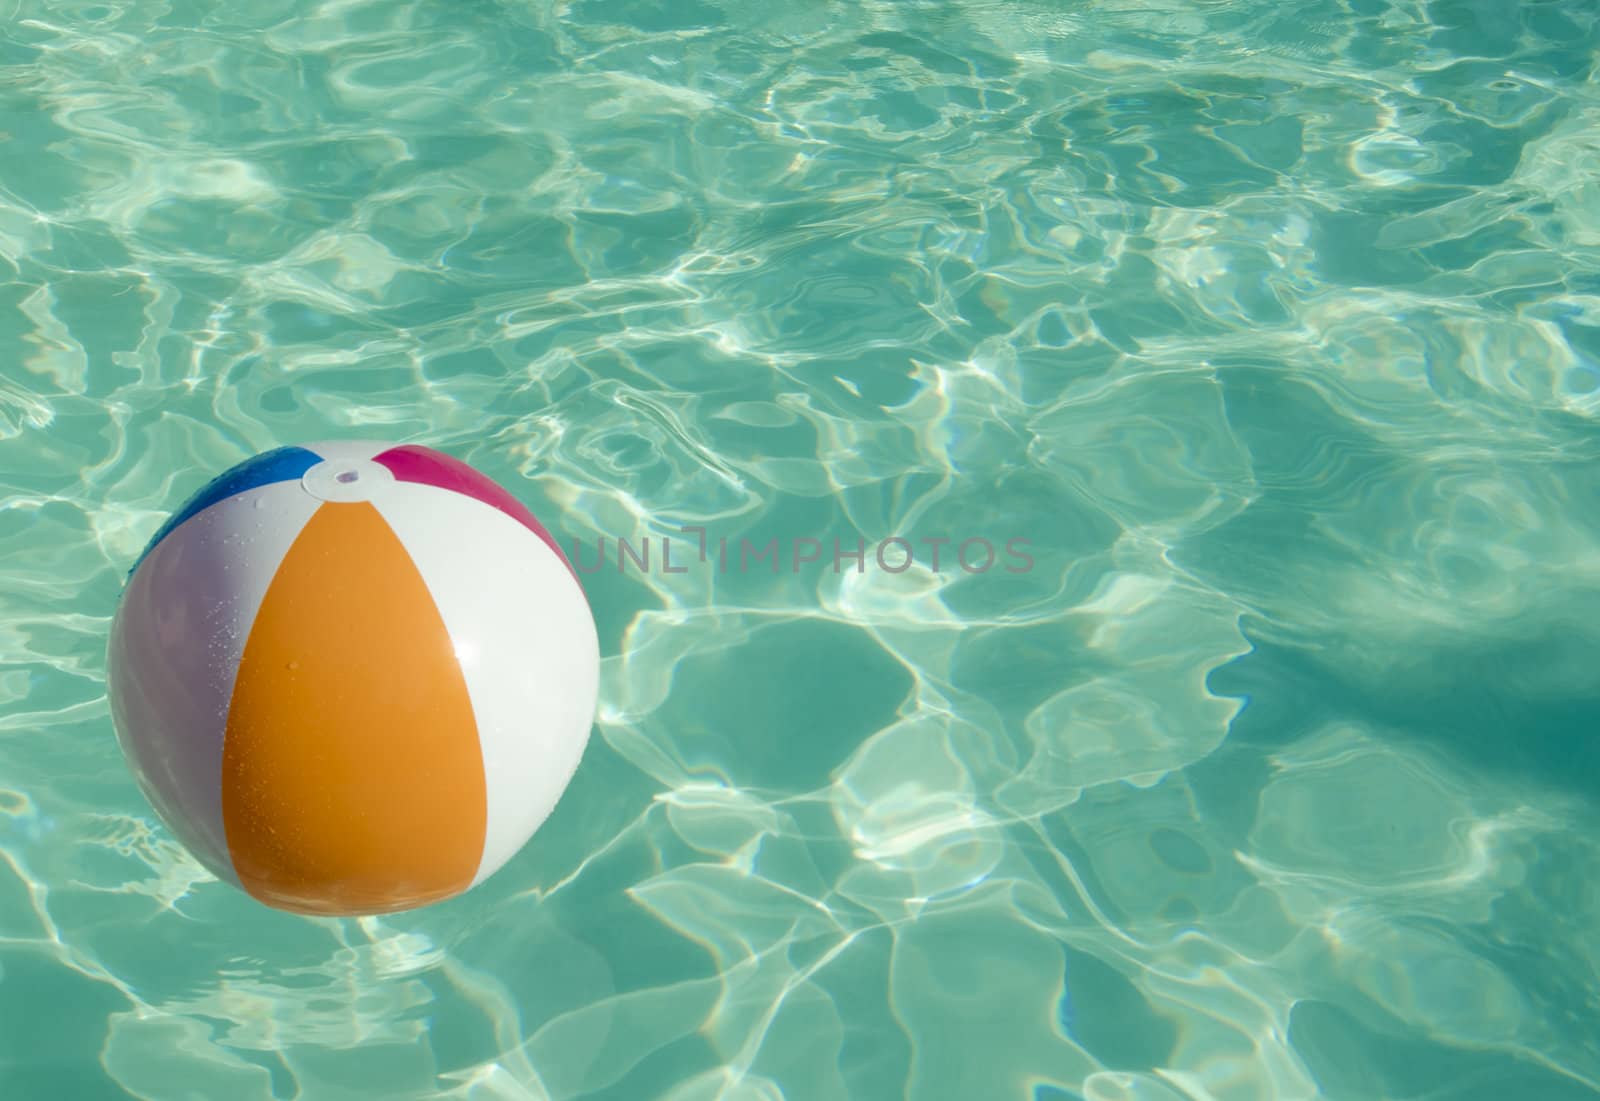 Ball in swimming pool by EllenSmile